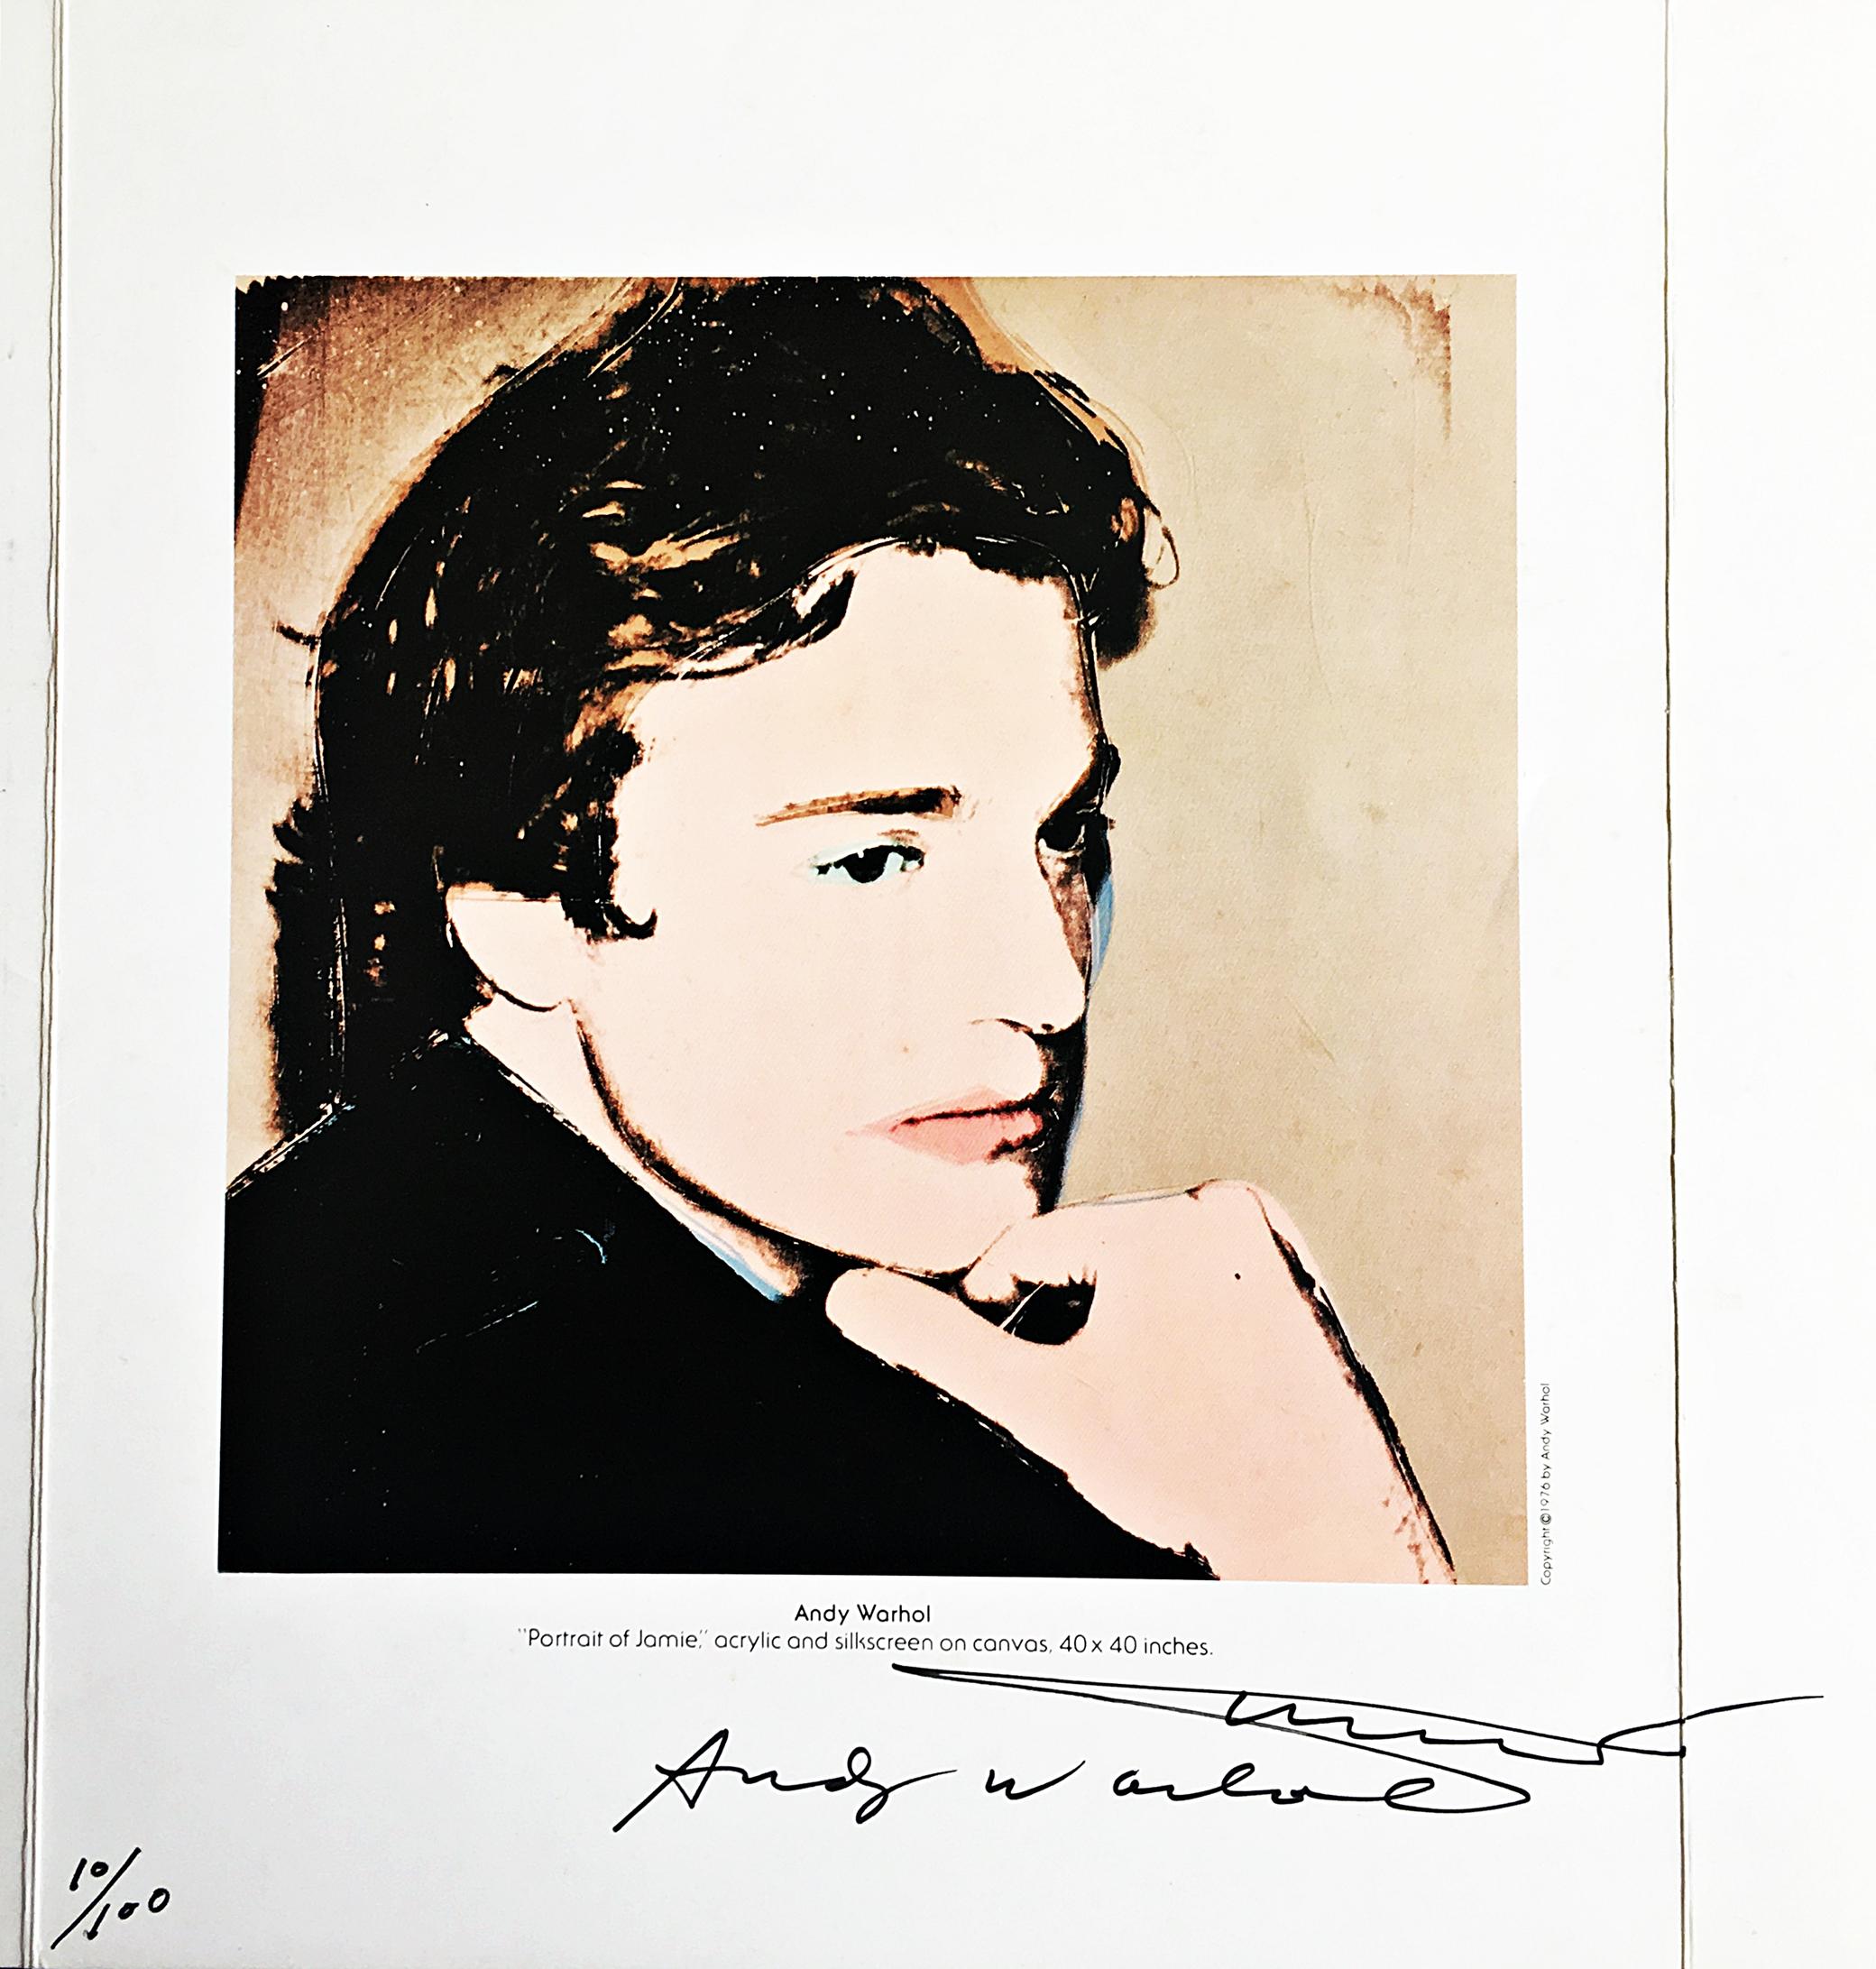 Andy Warhol & Jamie Wyeth: Portraits of Each Other (Hand Signed by both artists) - Print by Andy Warhol and Jamie Wyeth